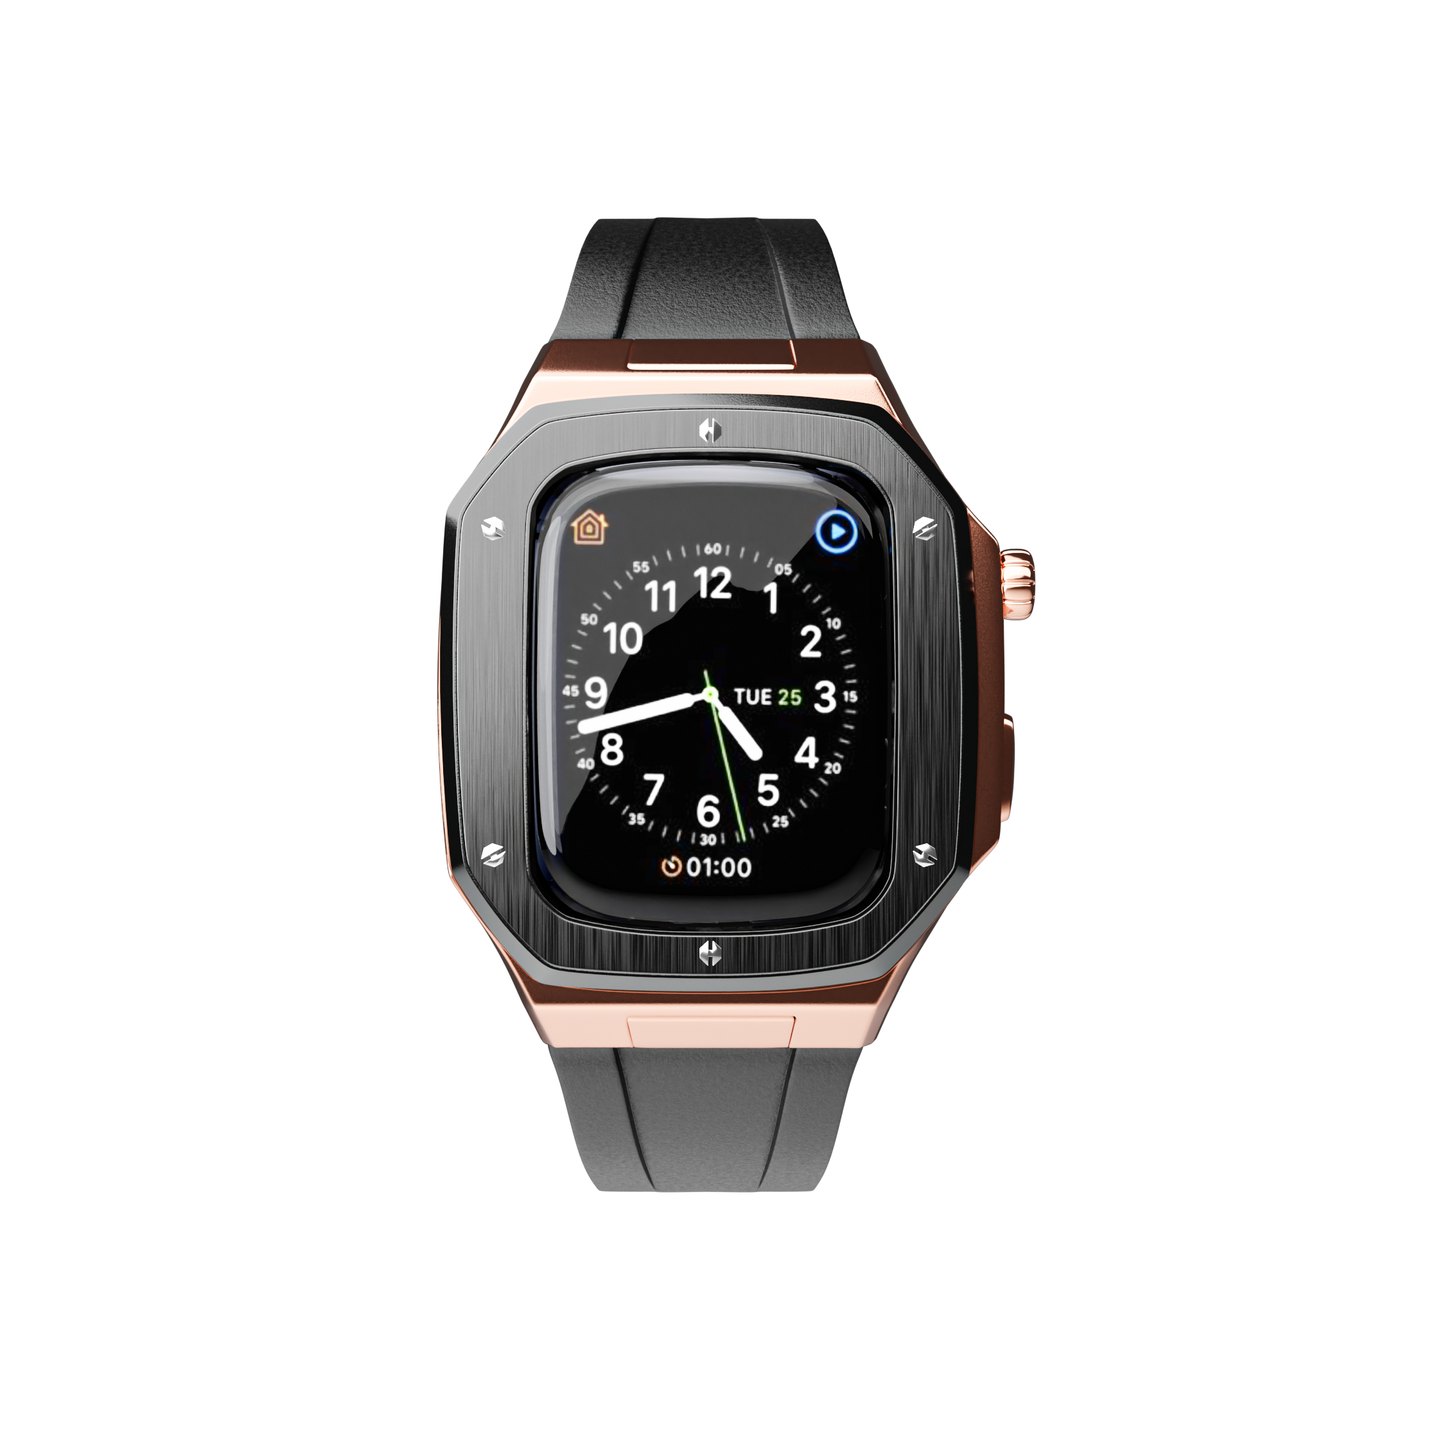 The Athlete Black with Rose gold